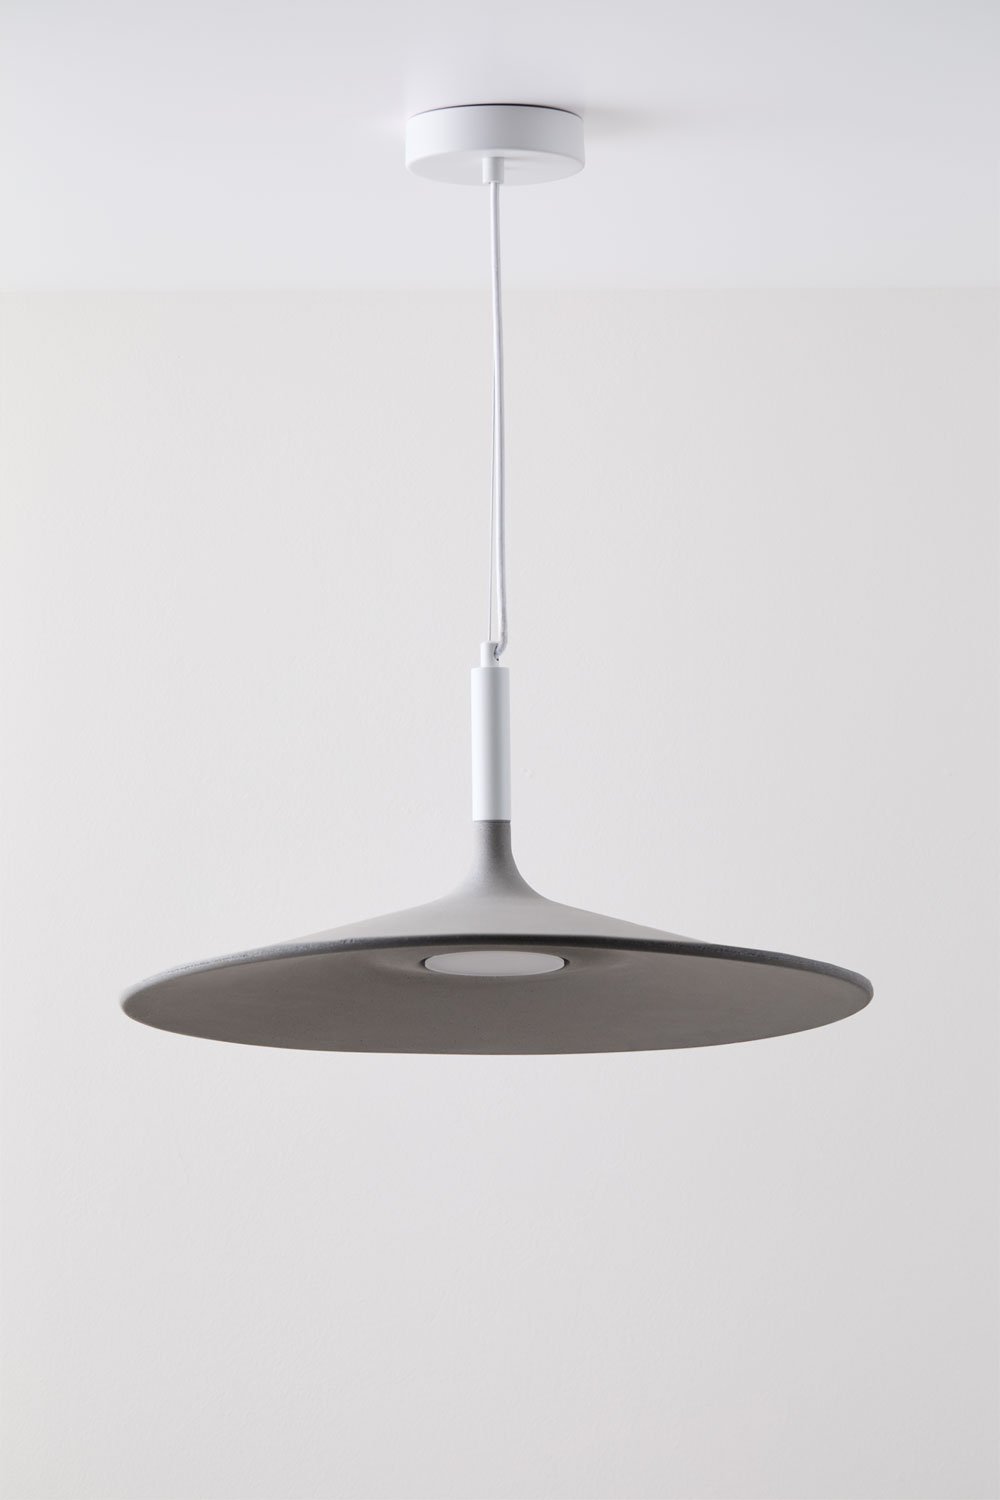 LED Ceiling Lamp in Kaula Cement, gallery image 1